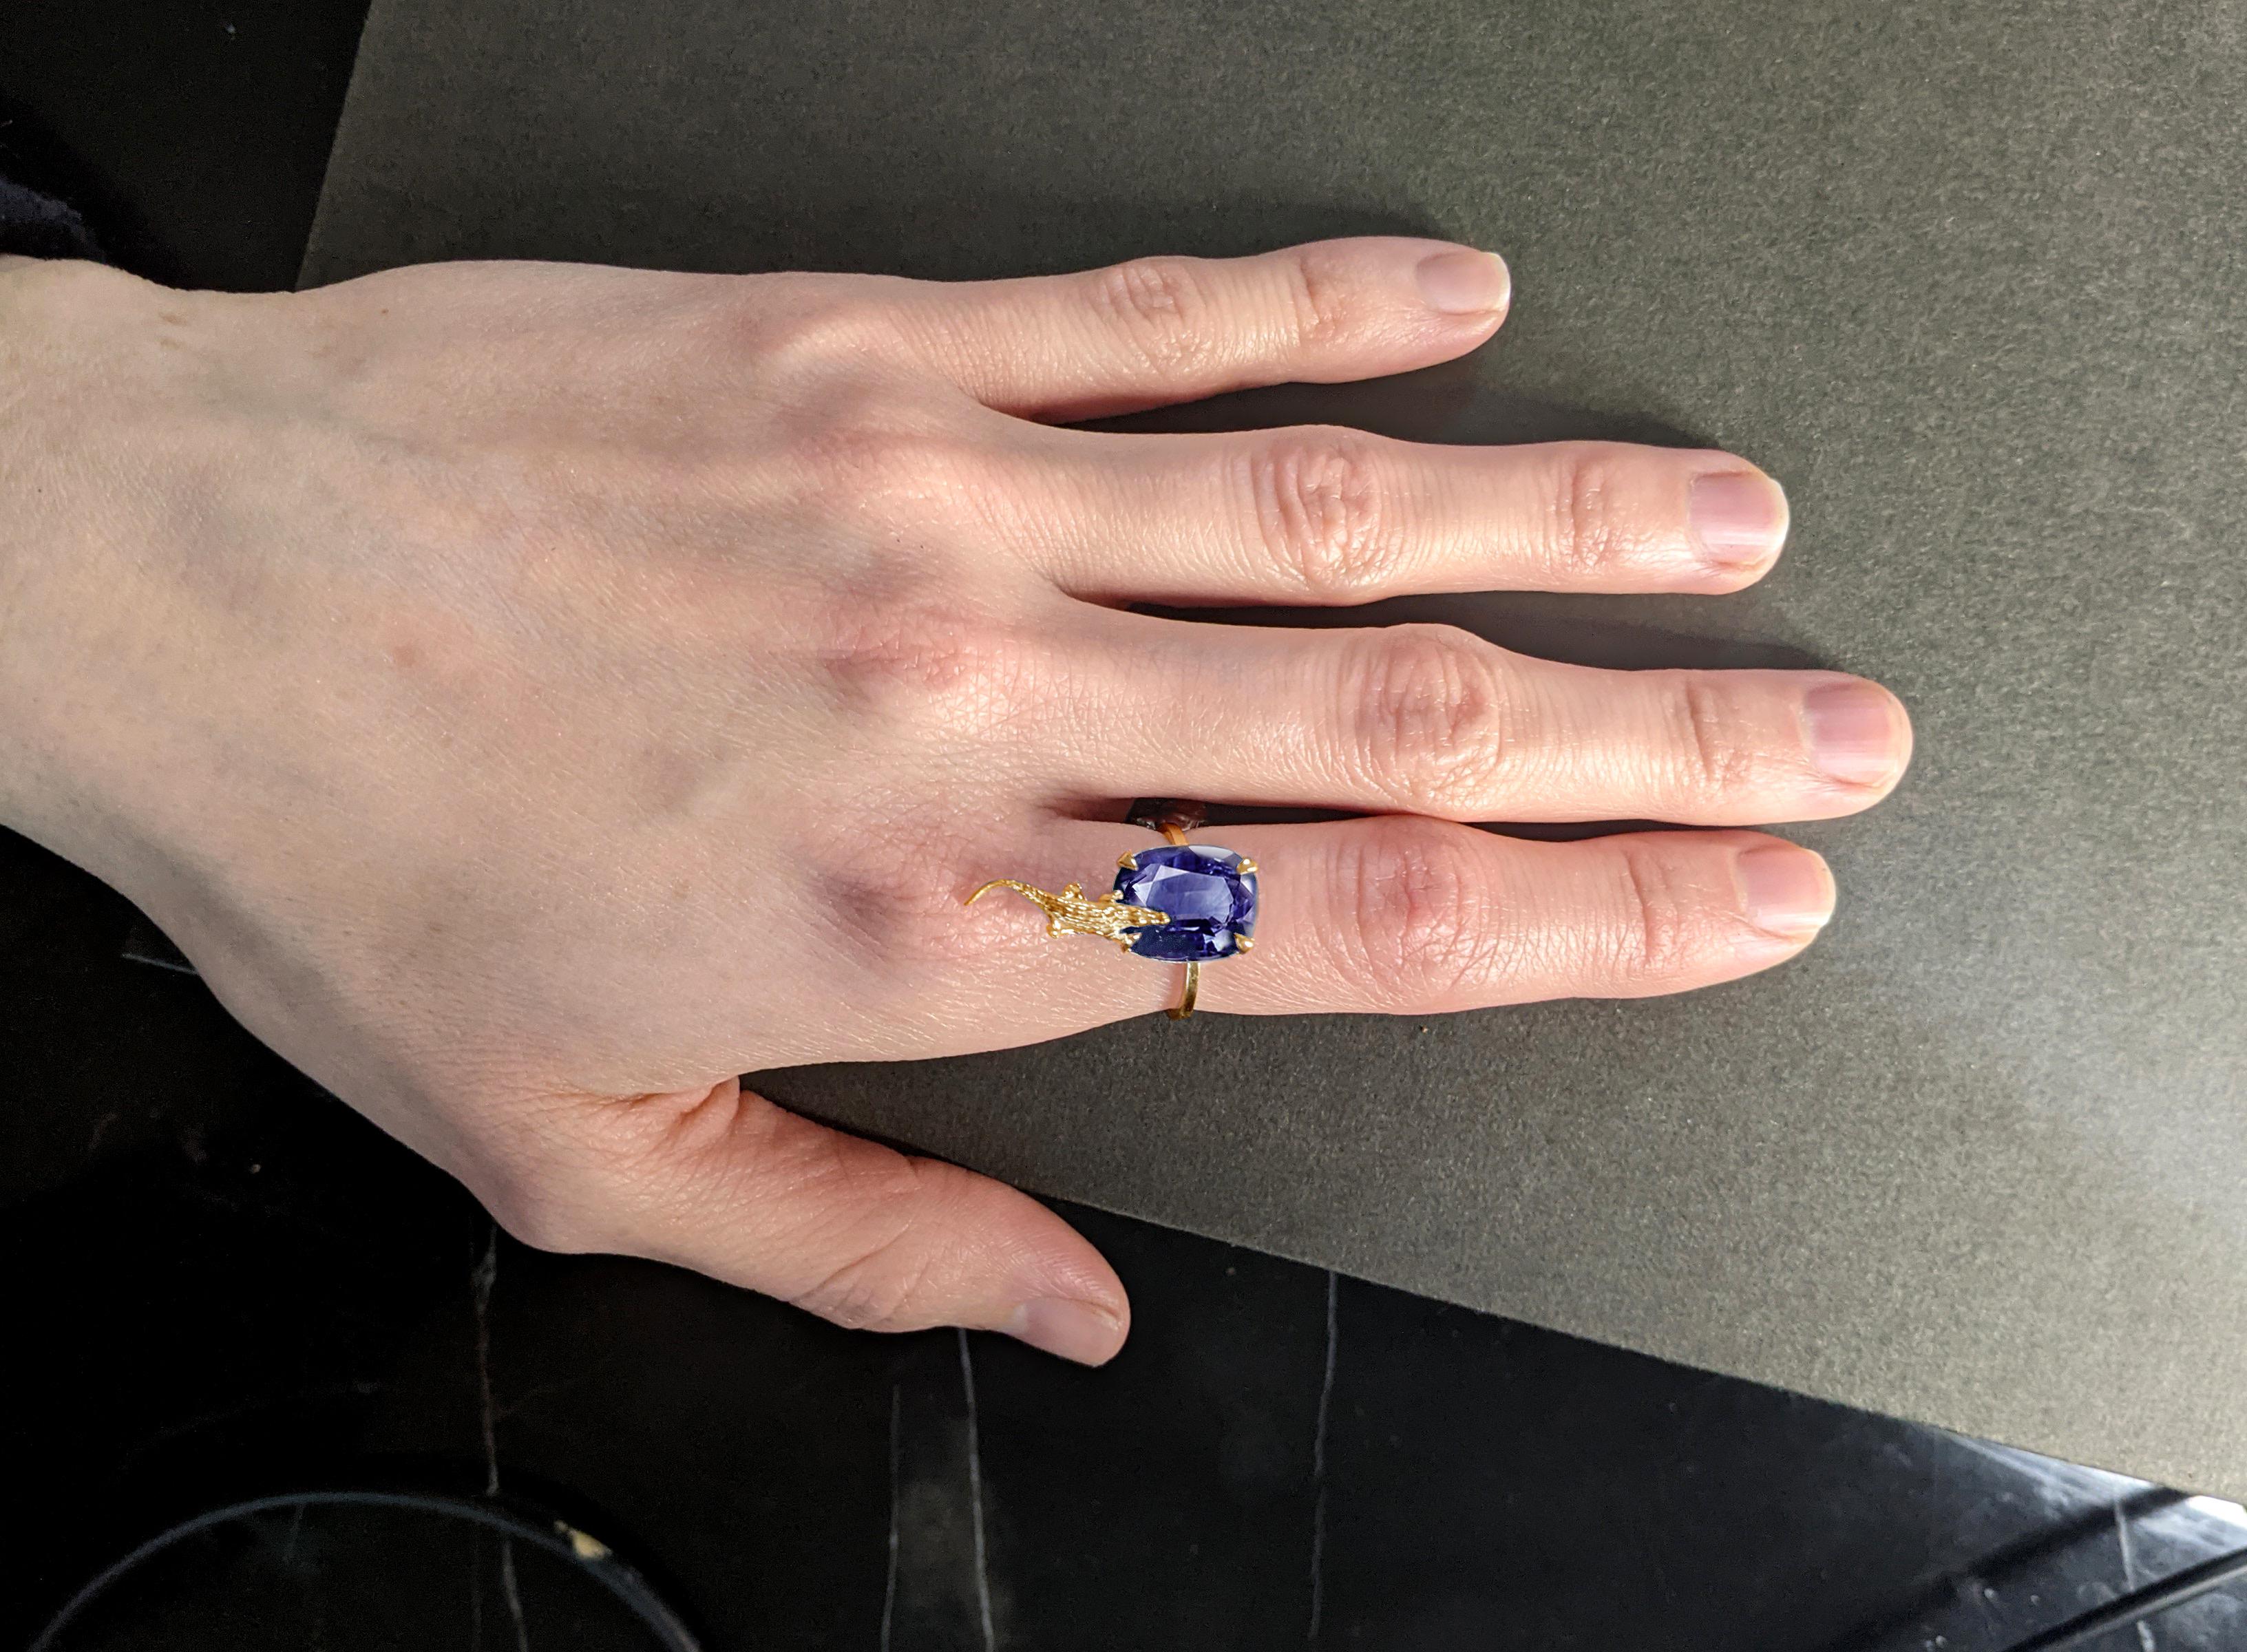 This 18 karat yellow gold contemporary Mesopotamian ring is encrusted with a natural cushion tanzanite weighing 2.14 carats and measuring 9.3x6.8 mm. The gem catches the eye's attention and is well designed in a contemporary piece.

This piece can